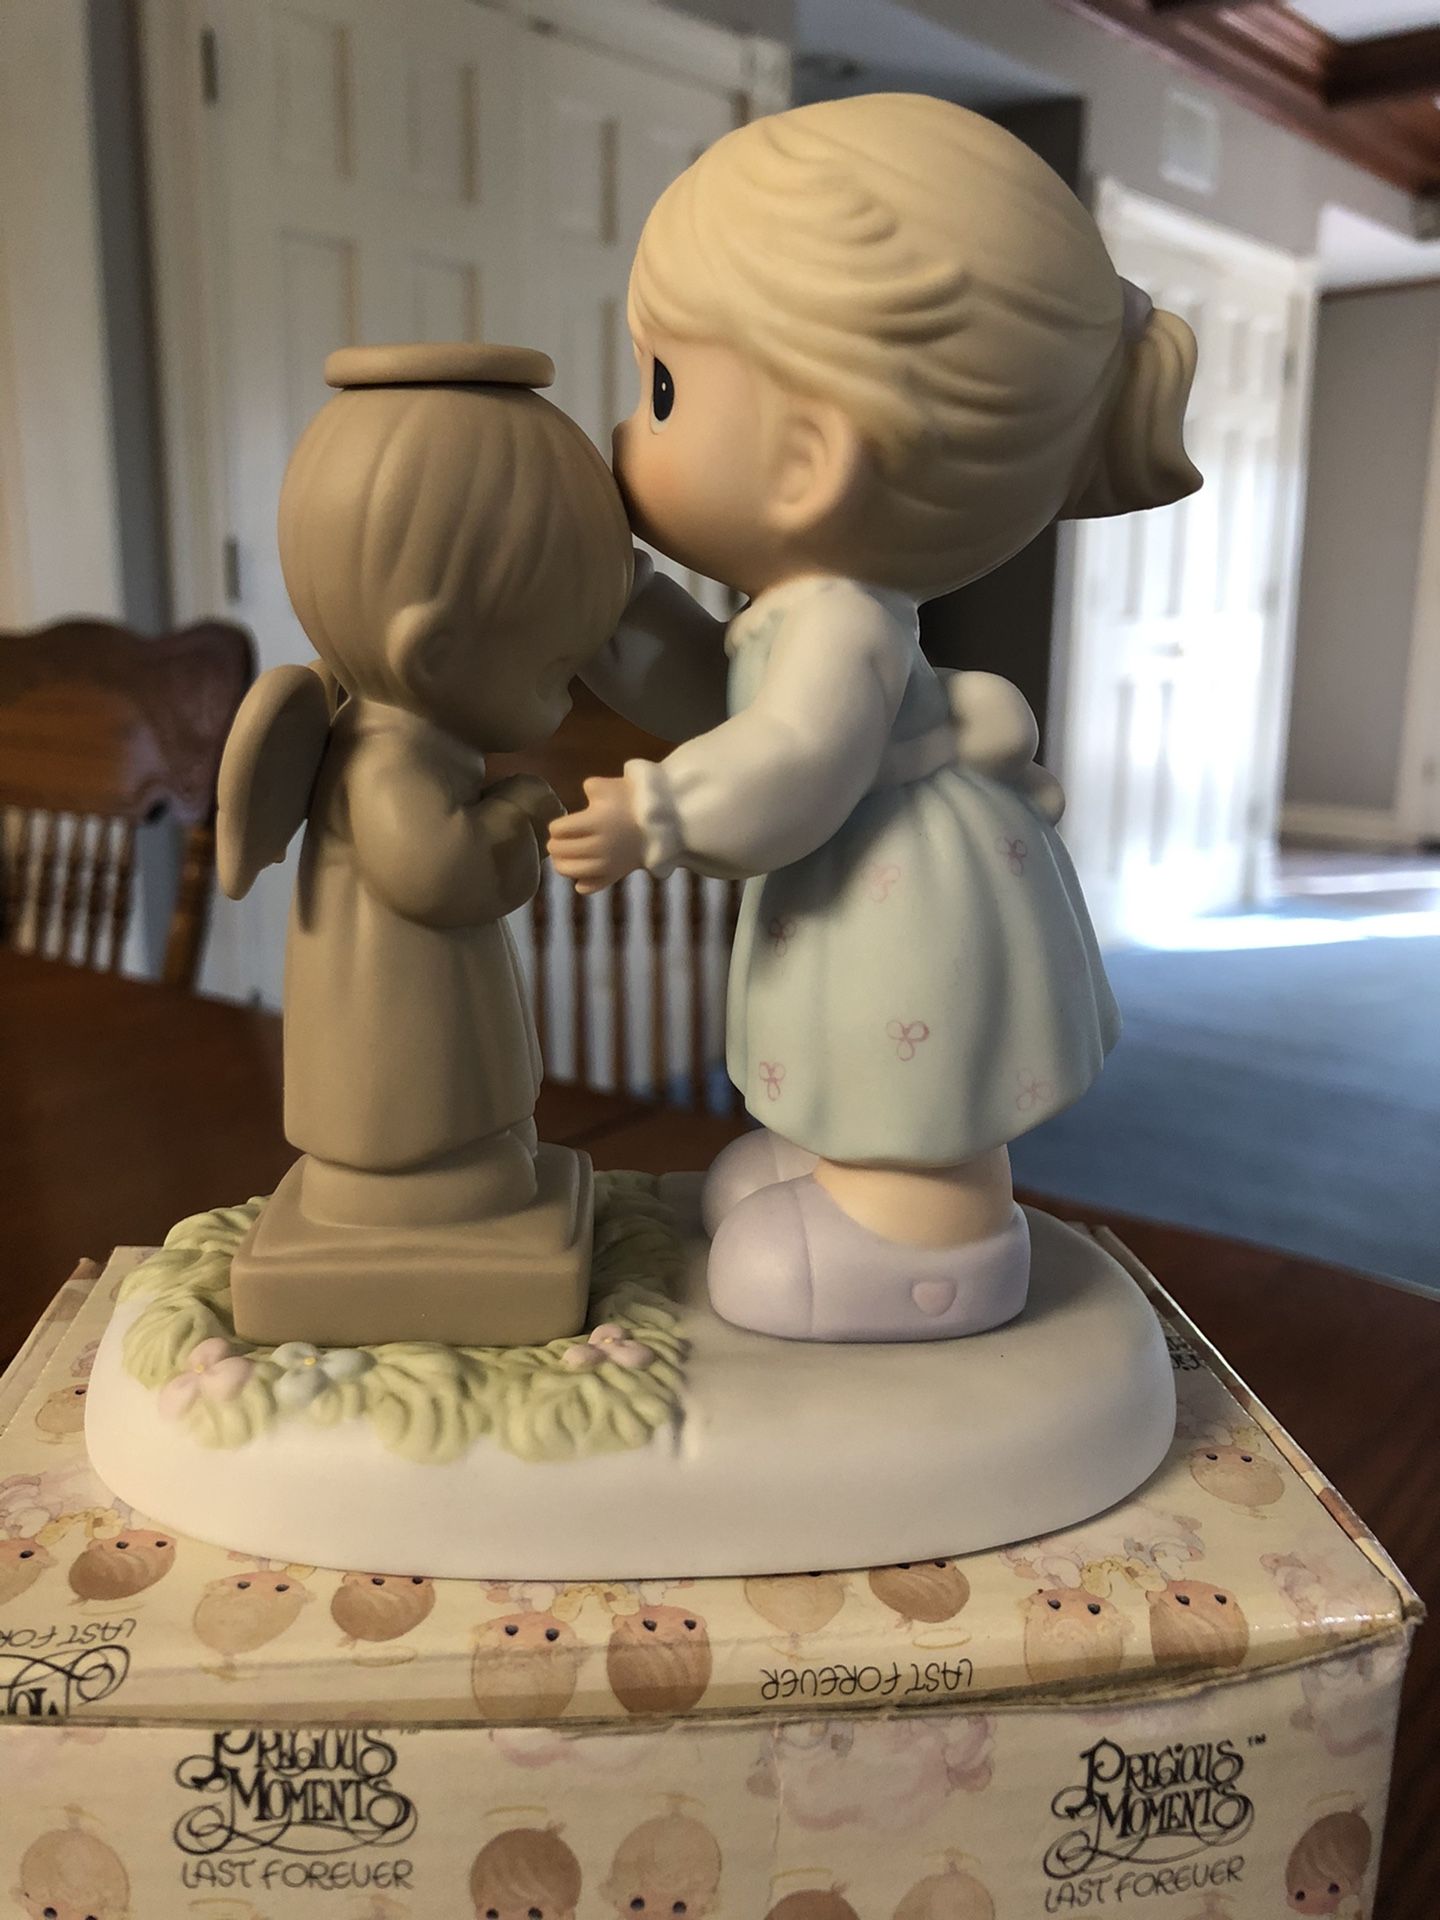 Precious Moments "Heaven must have sent you" figurine